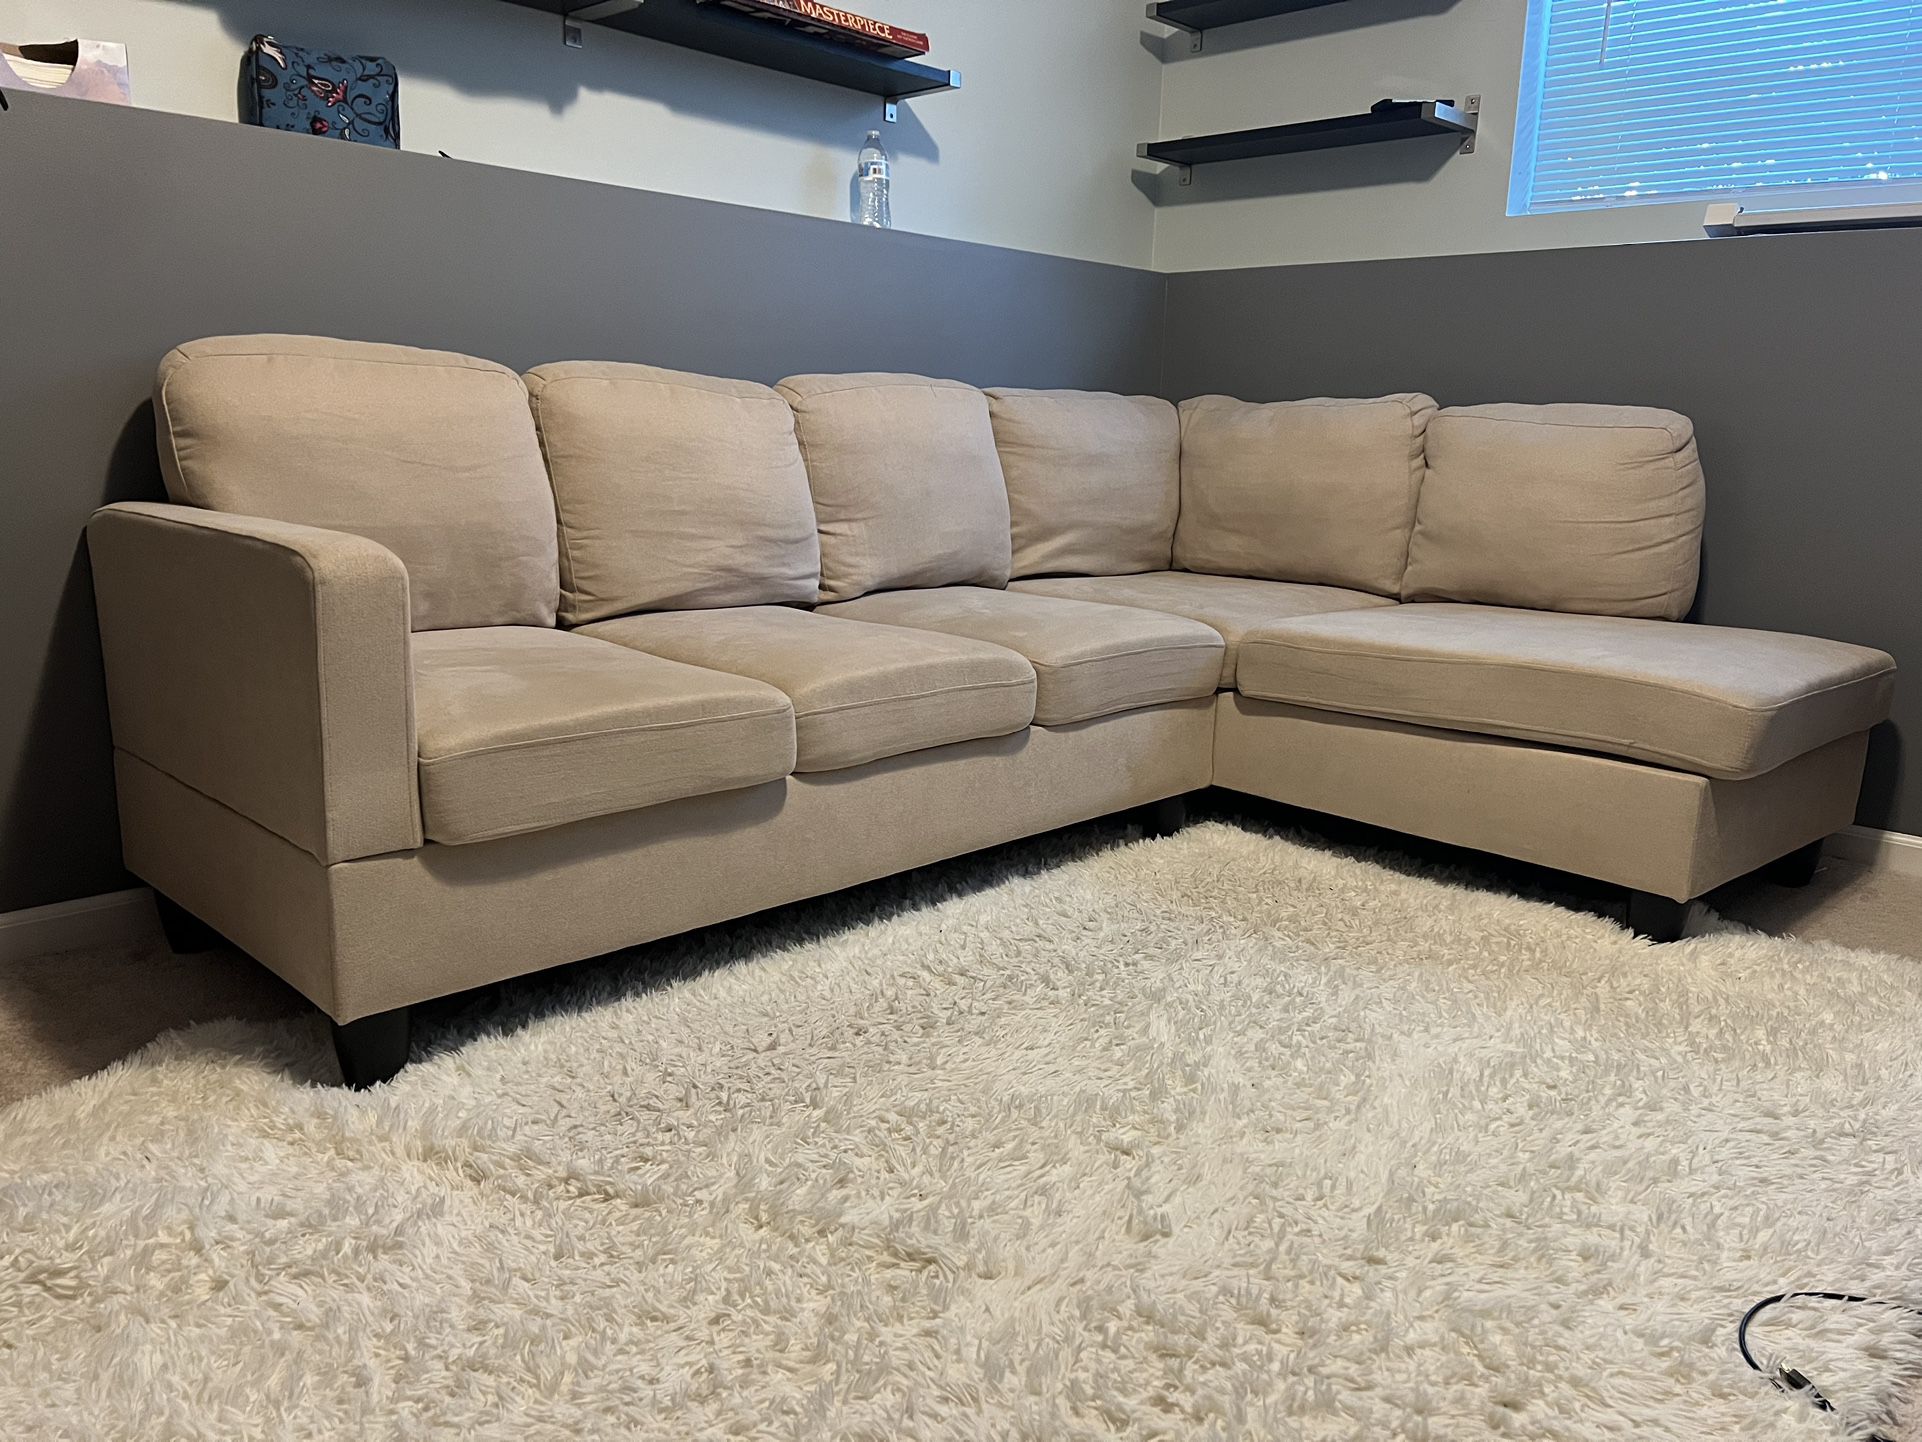 Cream / Beige Sectional Couch